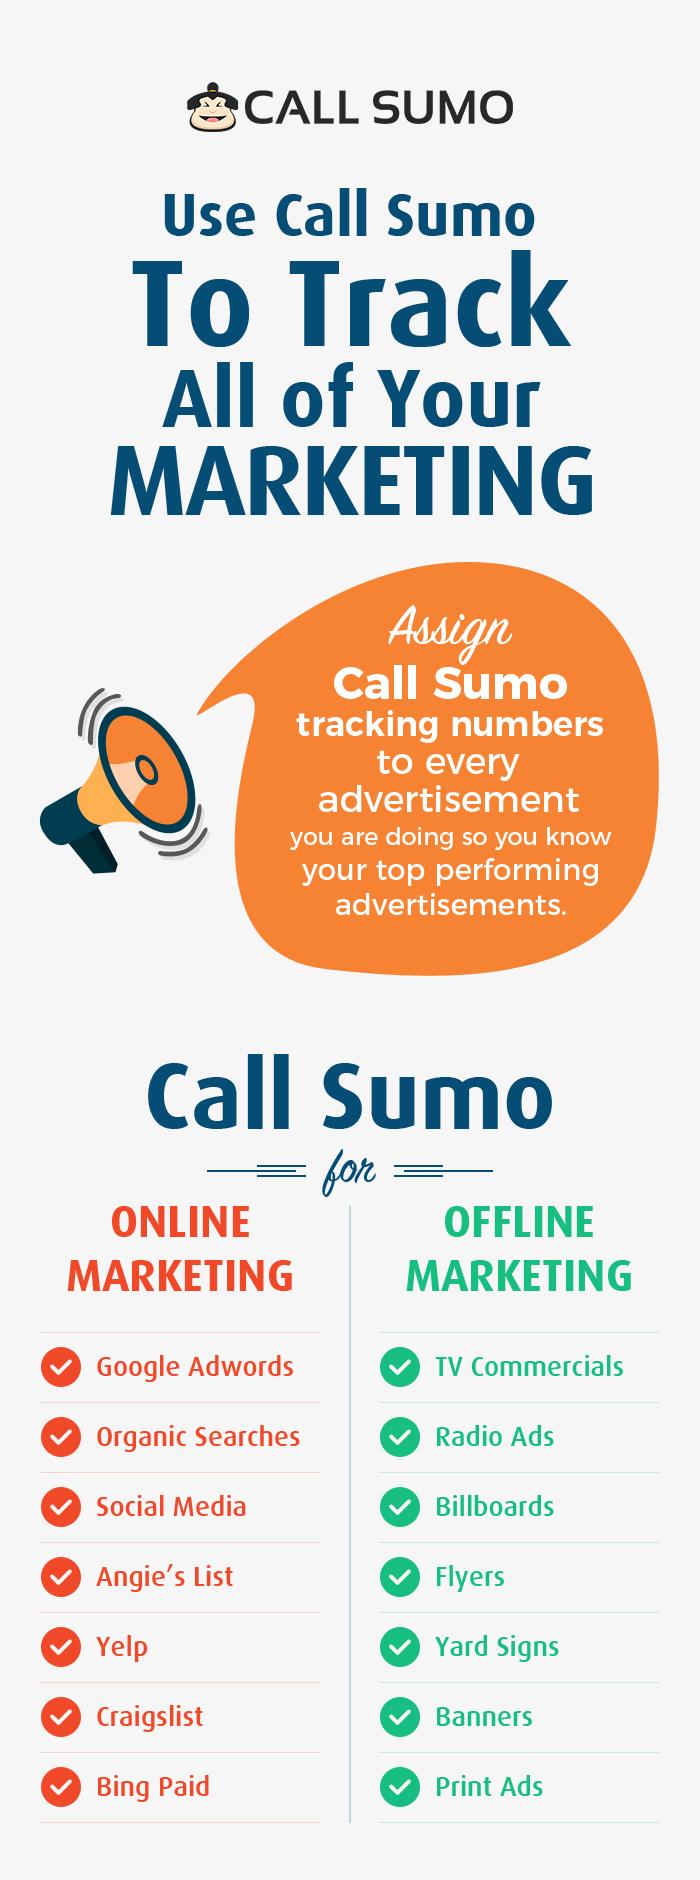 Use Call Sumo to Track All your Marketing Efforts